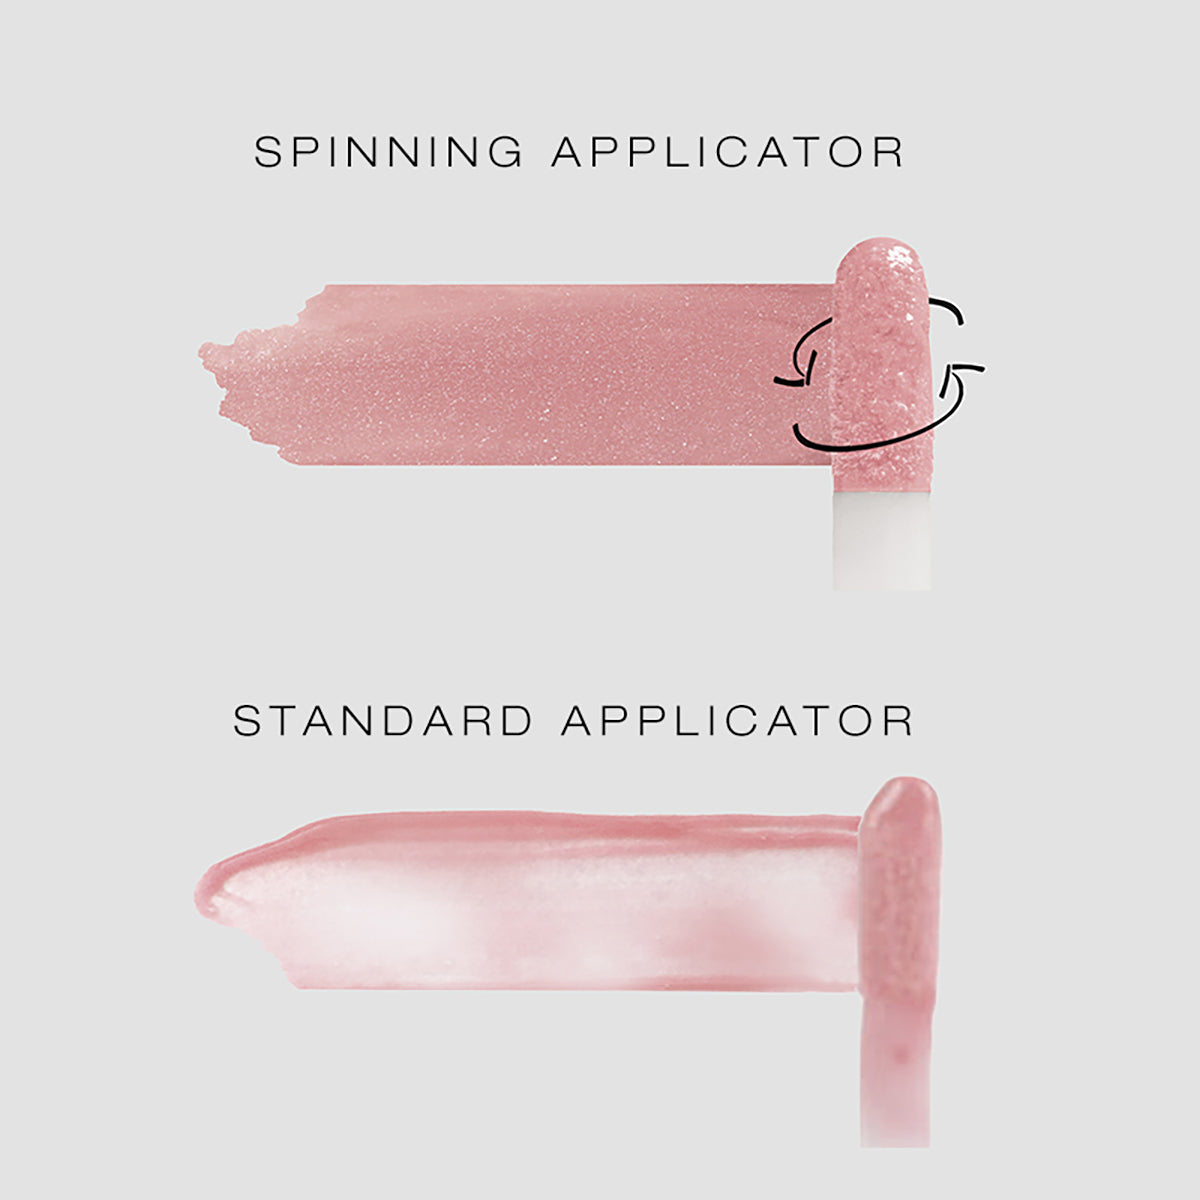 Application of the spin on lip gloss as more dense and thorough compared to a standard applicator